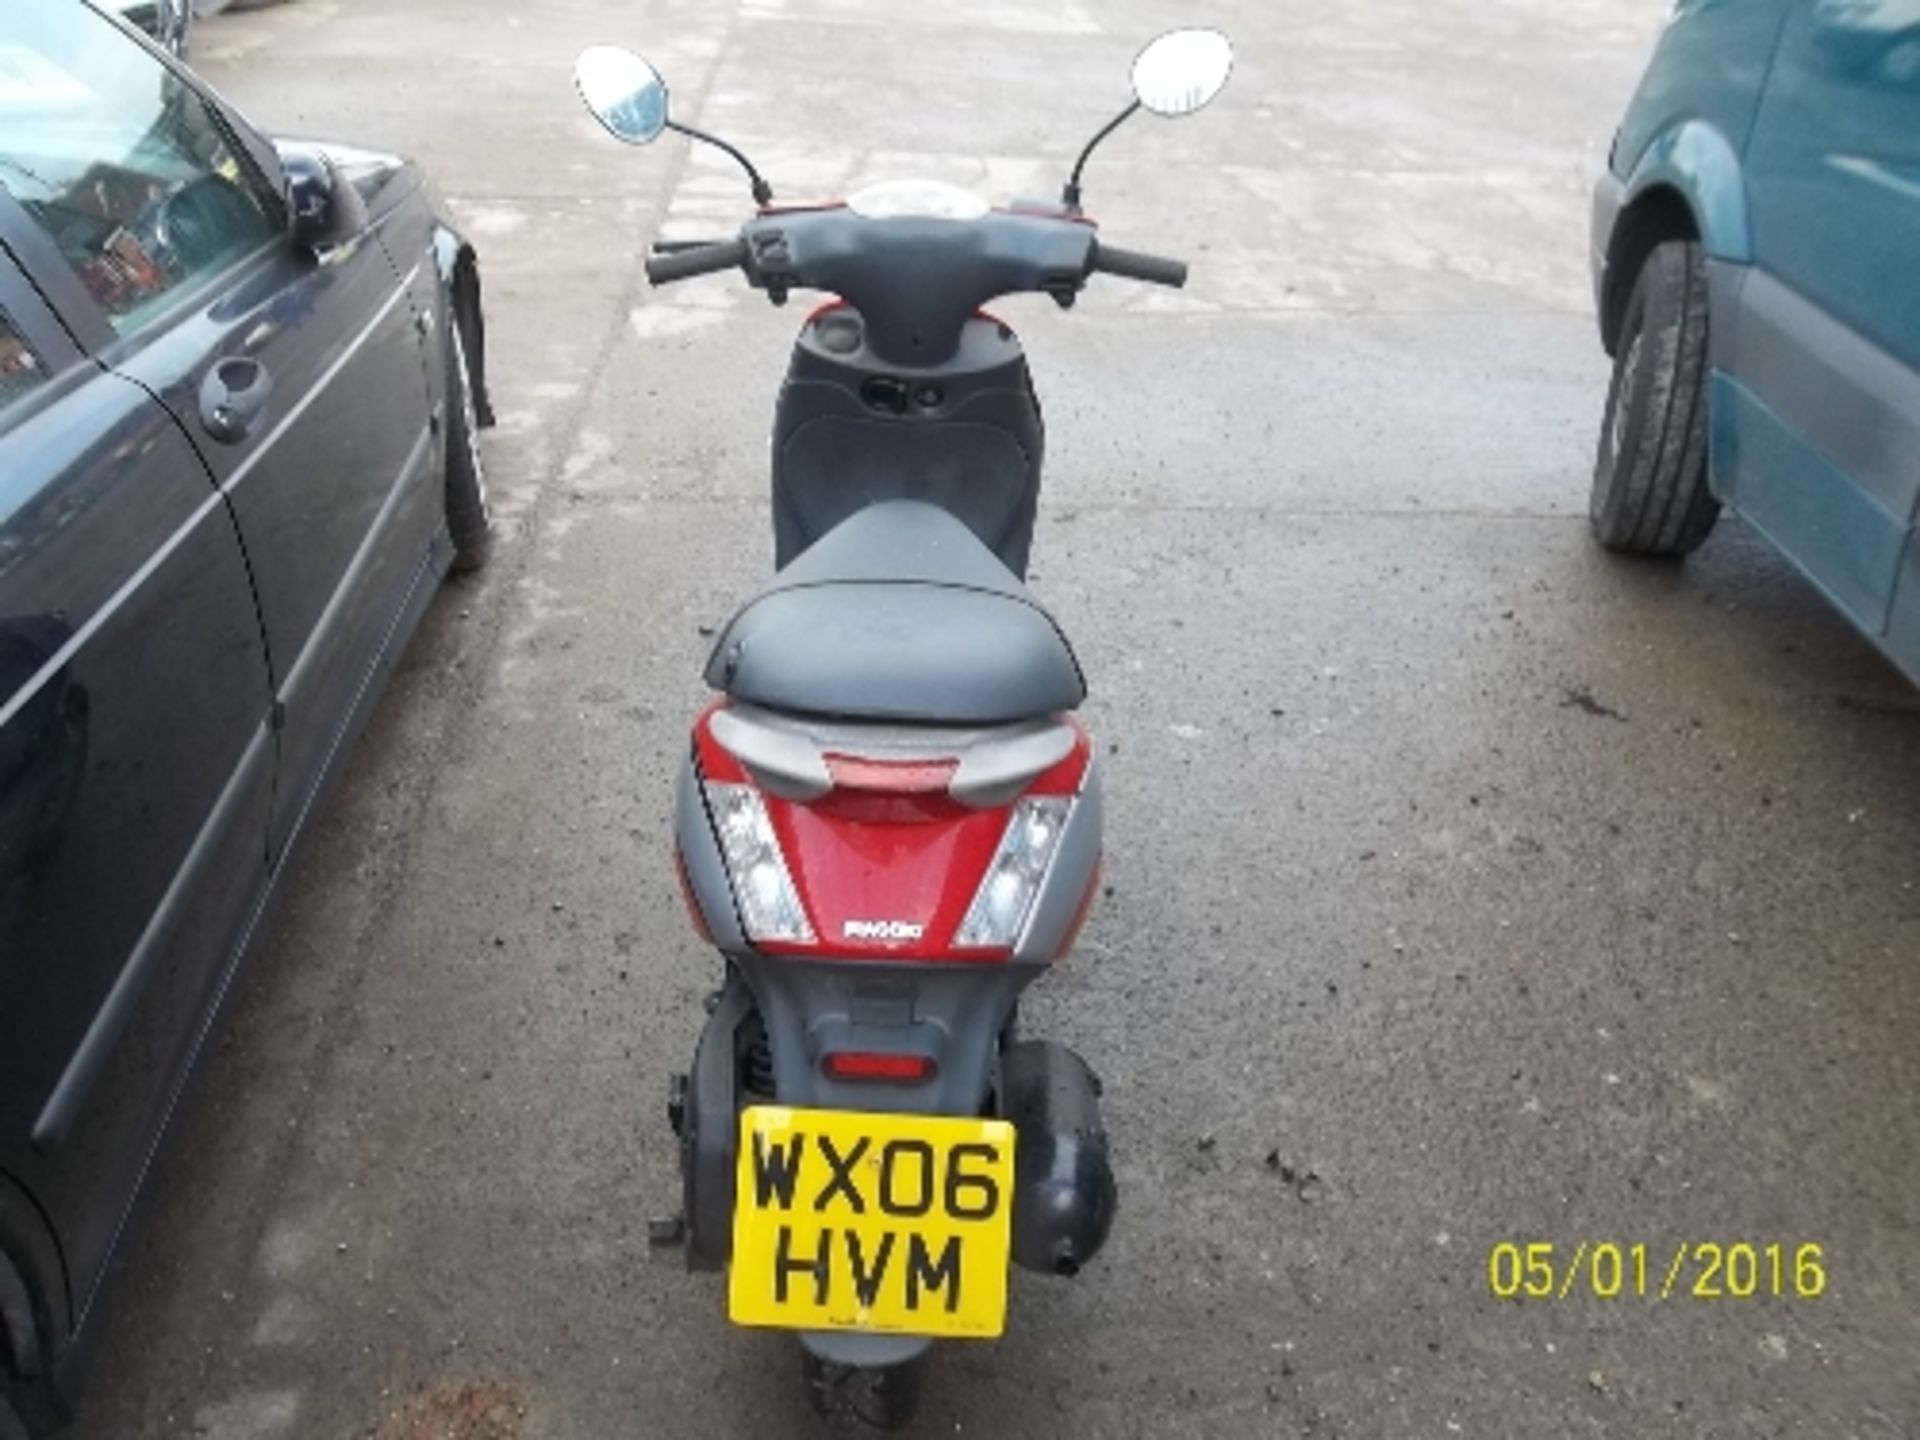 Piaggio Zip Moped - WX06 HVM Date of registration:  10.06.2006 50cc, petrol, red Odometer reading: - Image 3 of 4